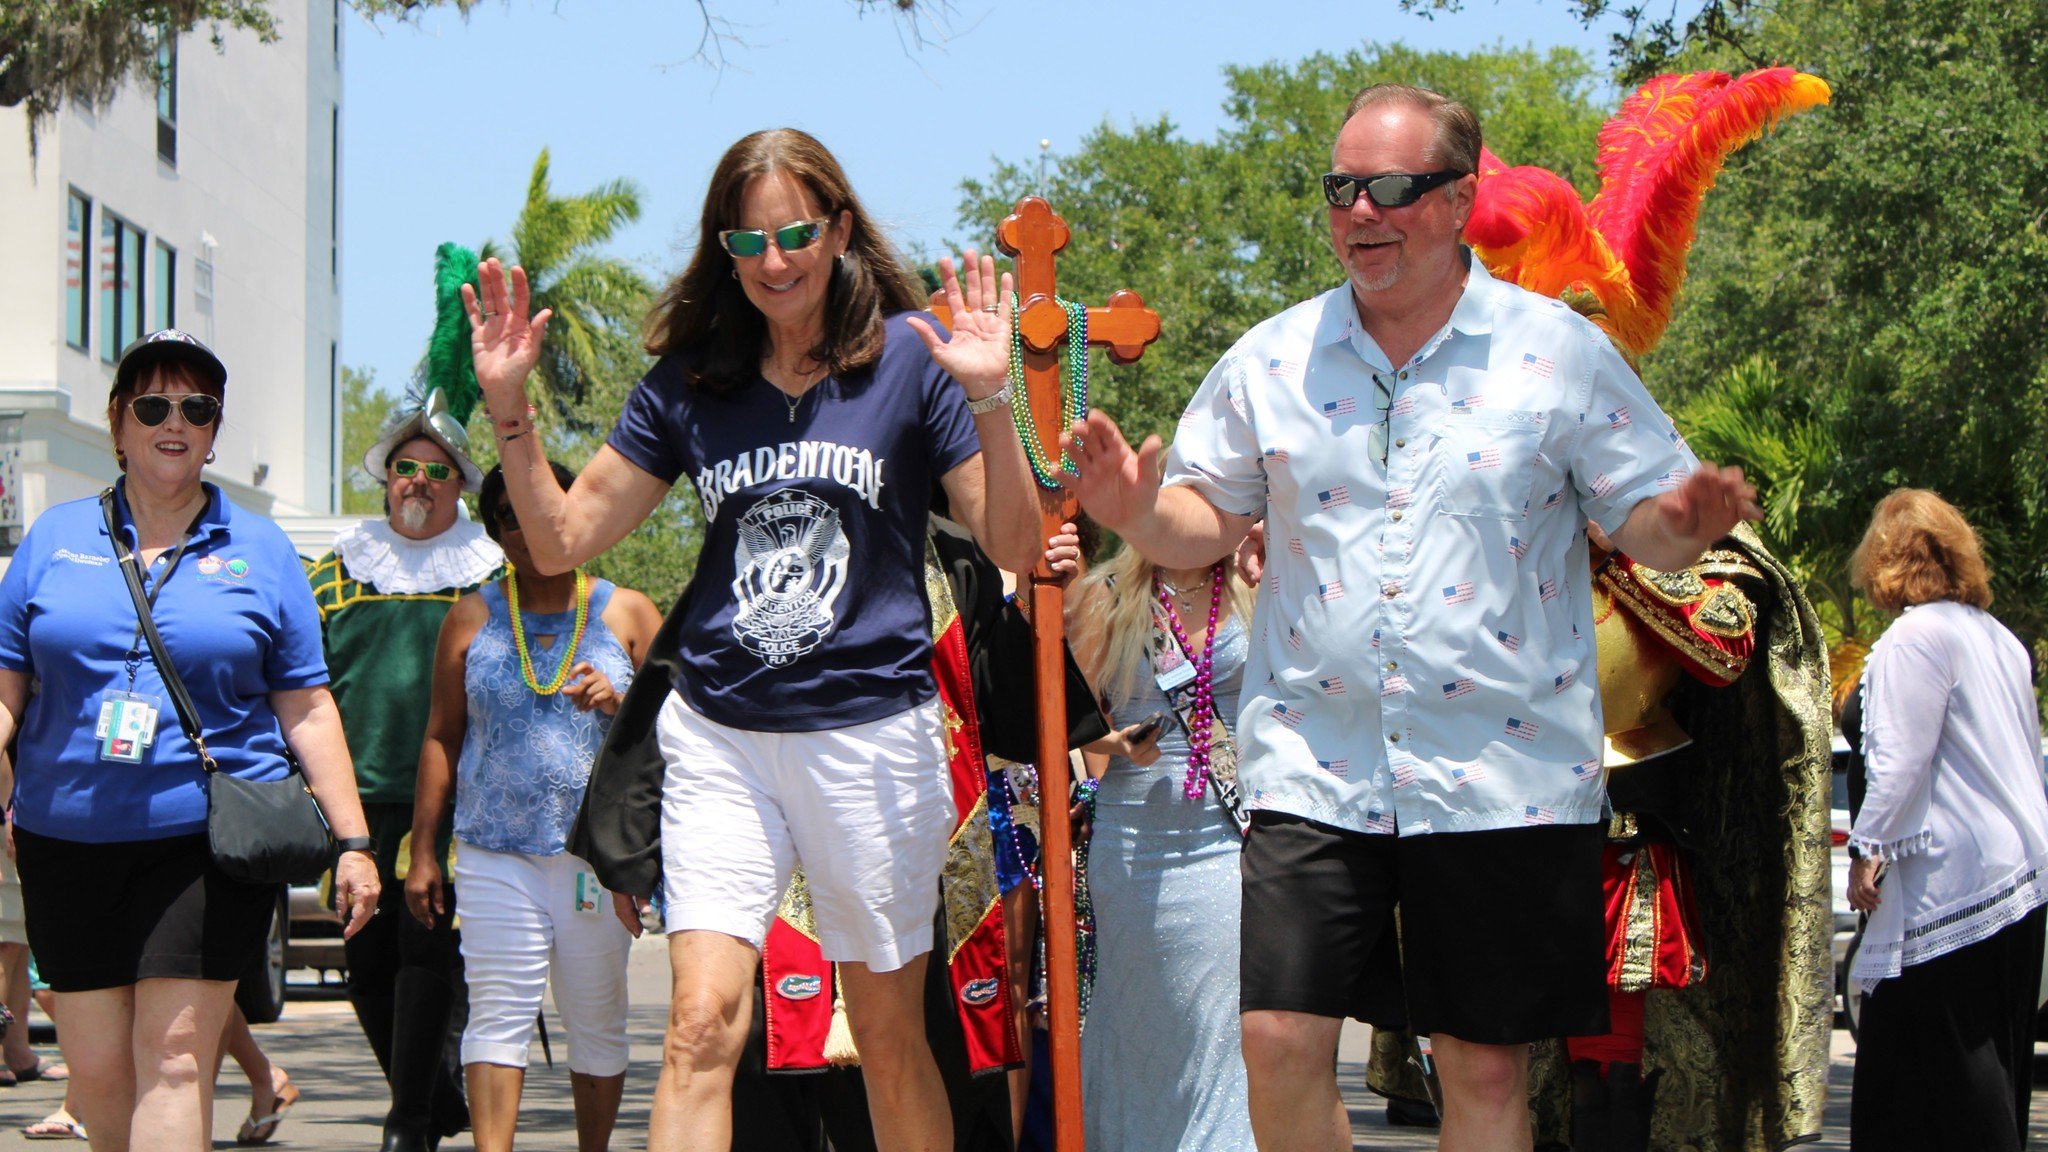 Can you believe we're just a week away from the 2024 De Soto Grand Parade? Good news - as of right now the forecast for the big day looks great. 🤞 Today, Don Hernando de Soto and his Crewe captured Chief Melanie Bevan and Mayor Gene Brown, and force